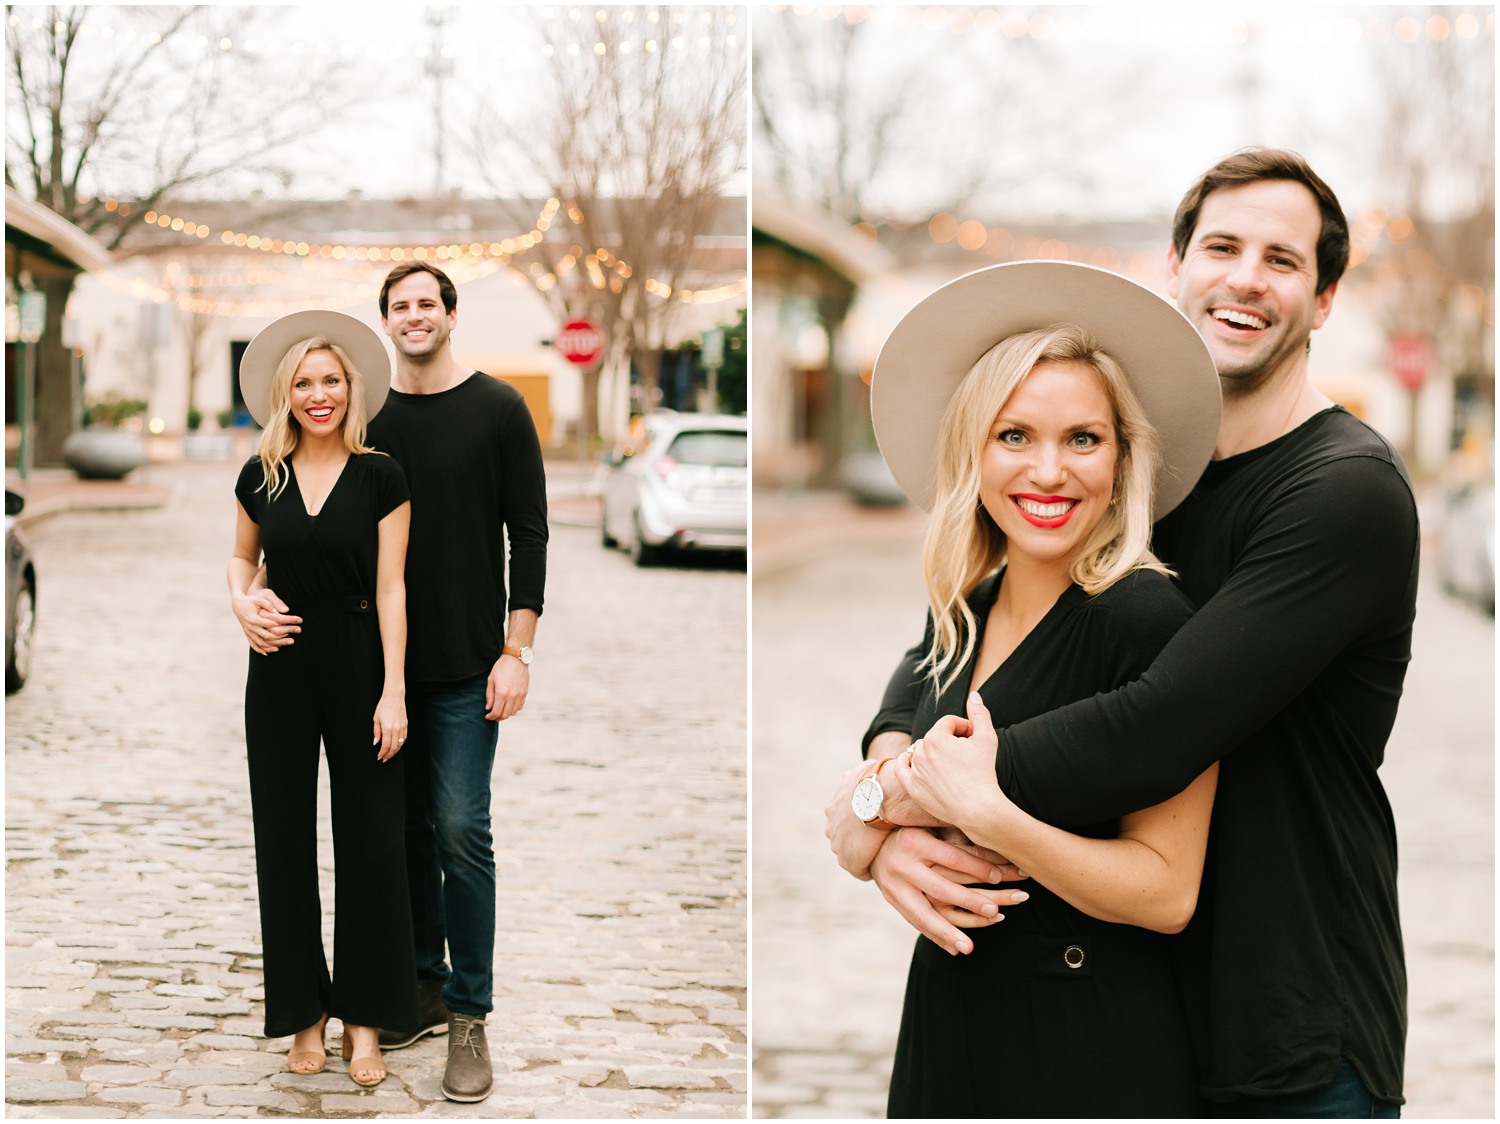 Chelsea Renay photographs bride and groom in downtown Raleigh